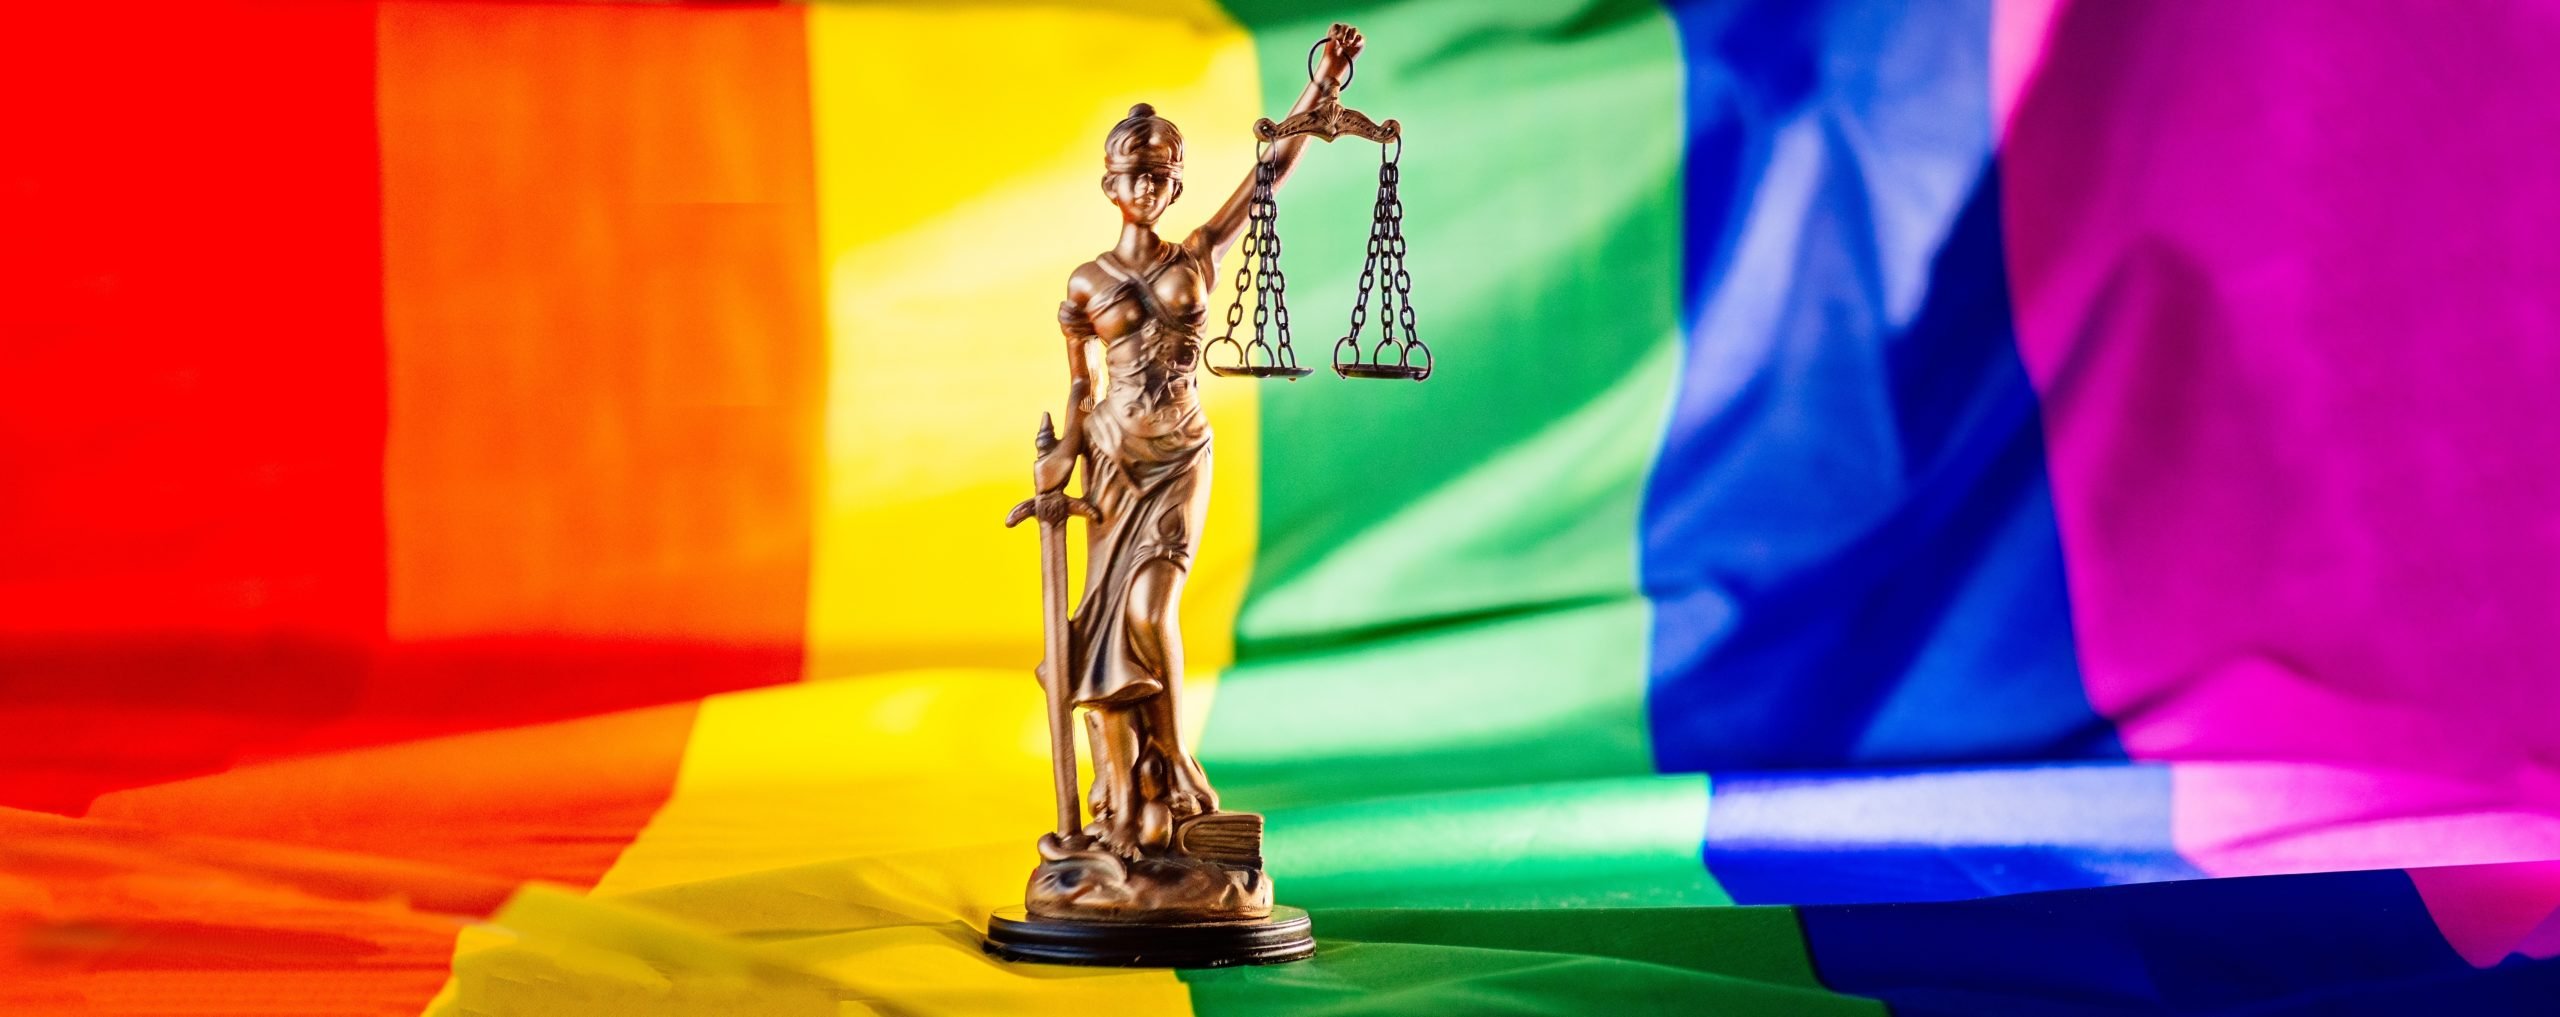 Statue of justice symbol of law and justice with lgbt flag